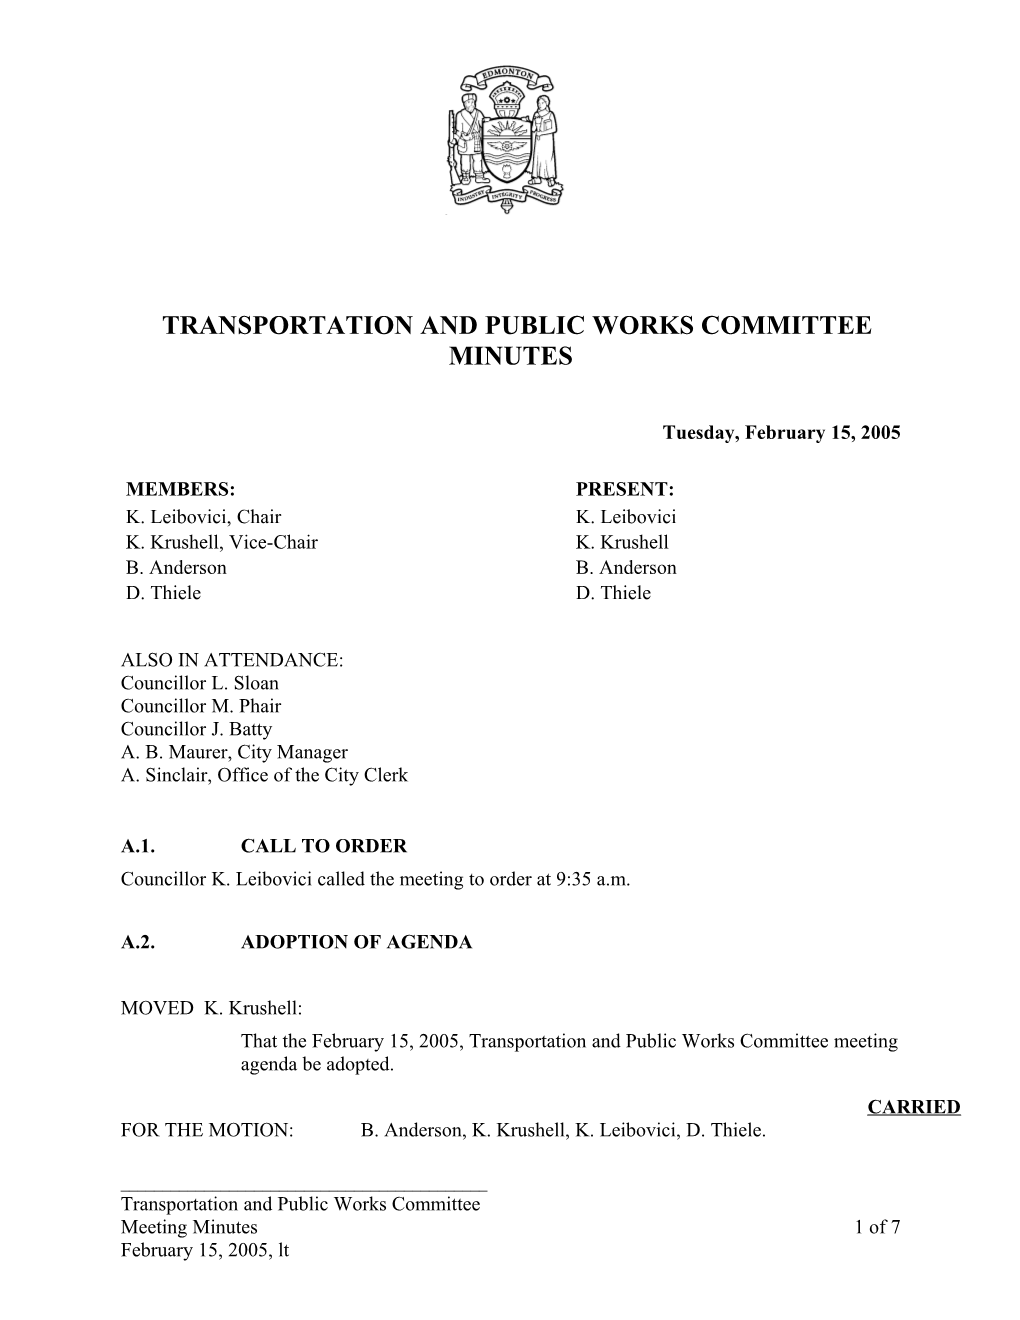 Minutes for Transportation and Public Works Committee February 15, 2005 Meeting